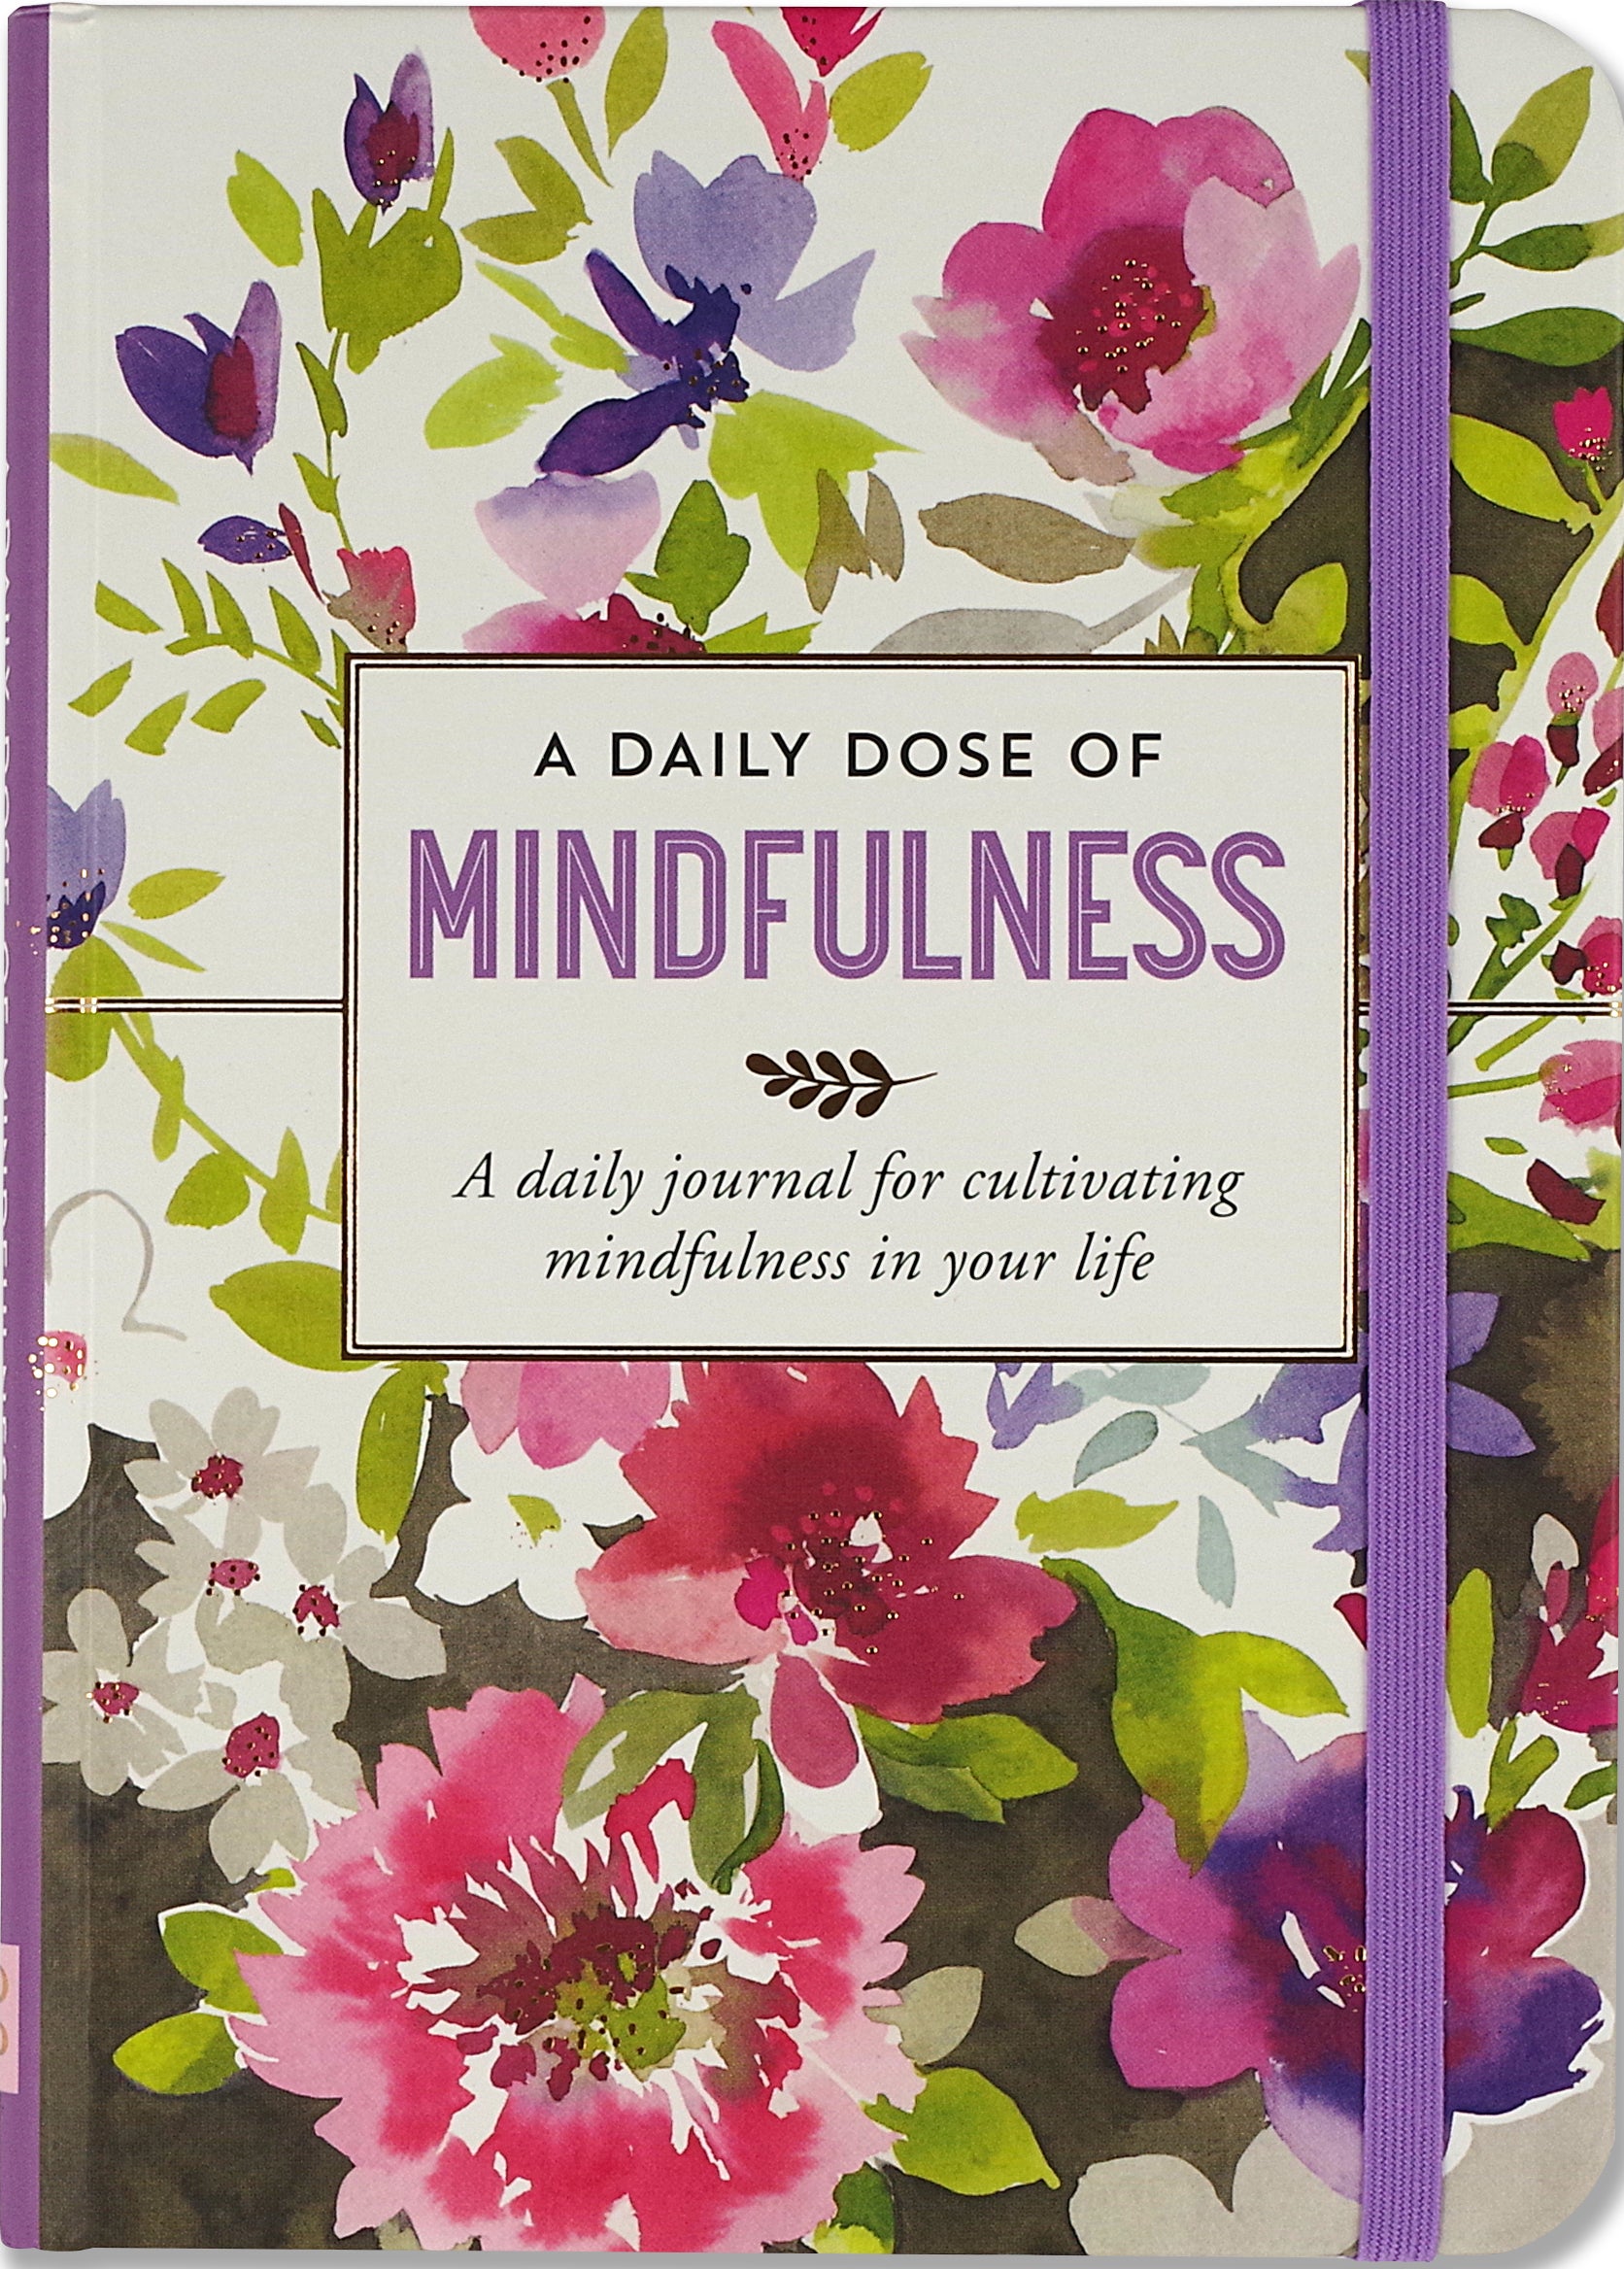 A Daily Dose of Mindfulness Daily Journal    